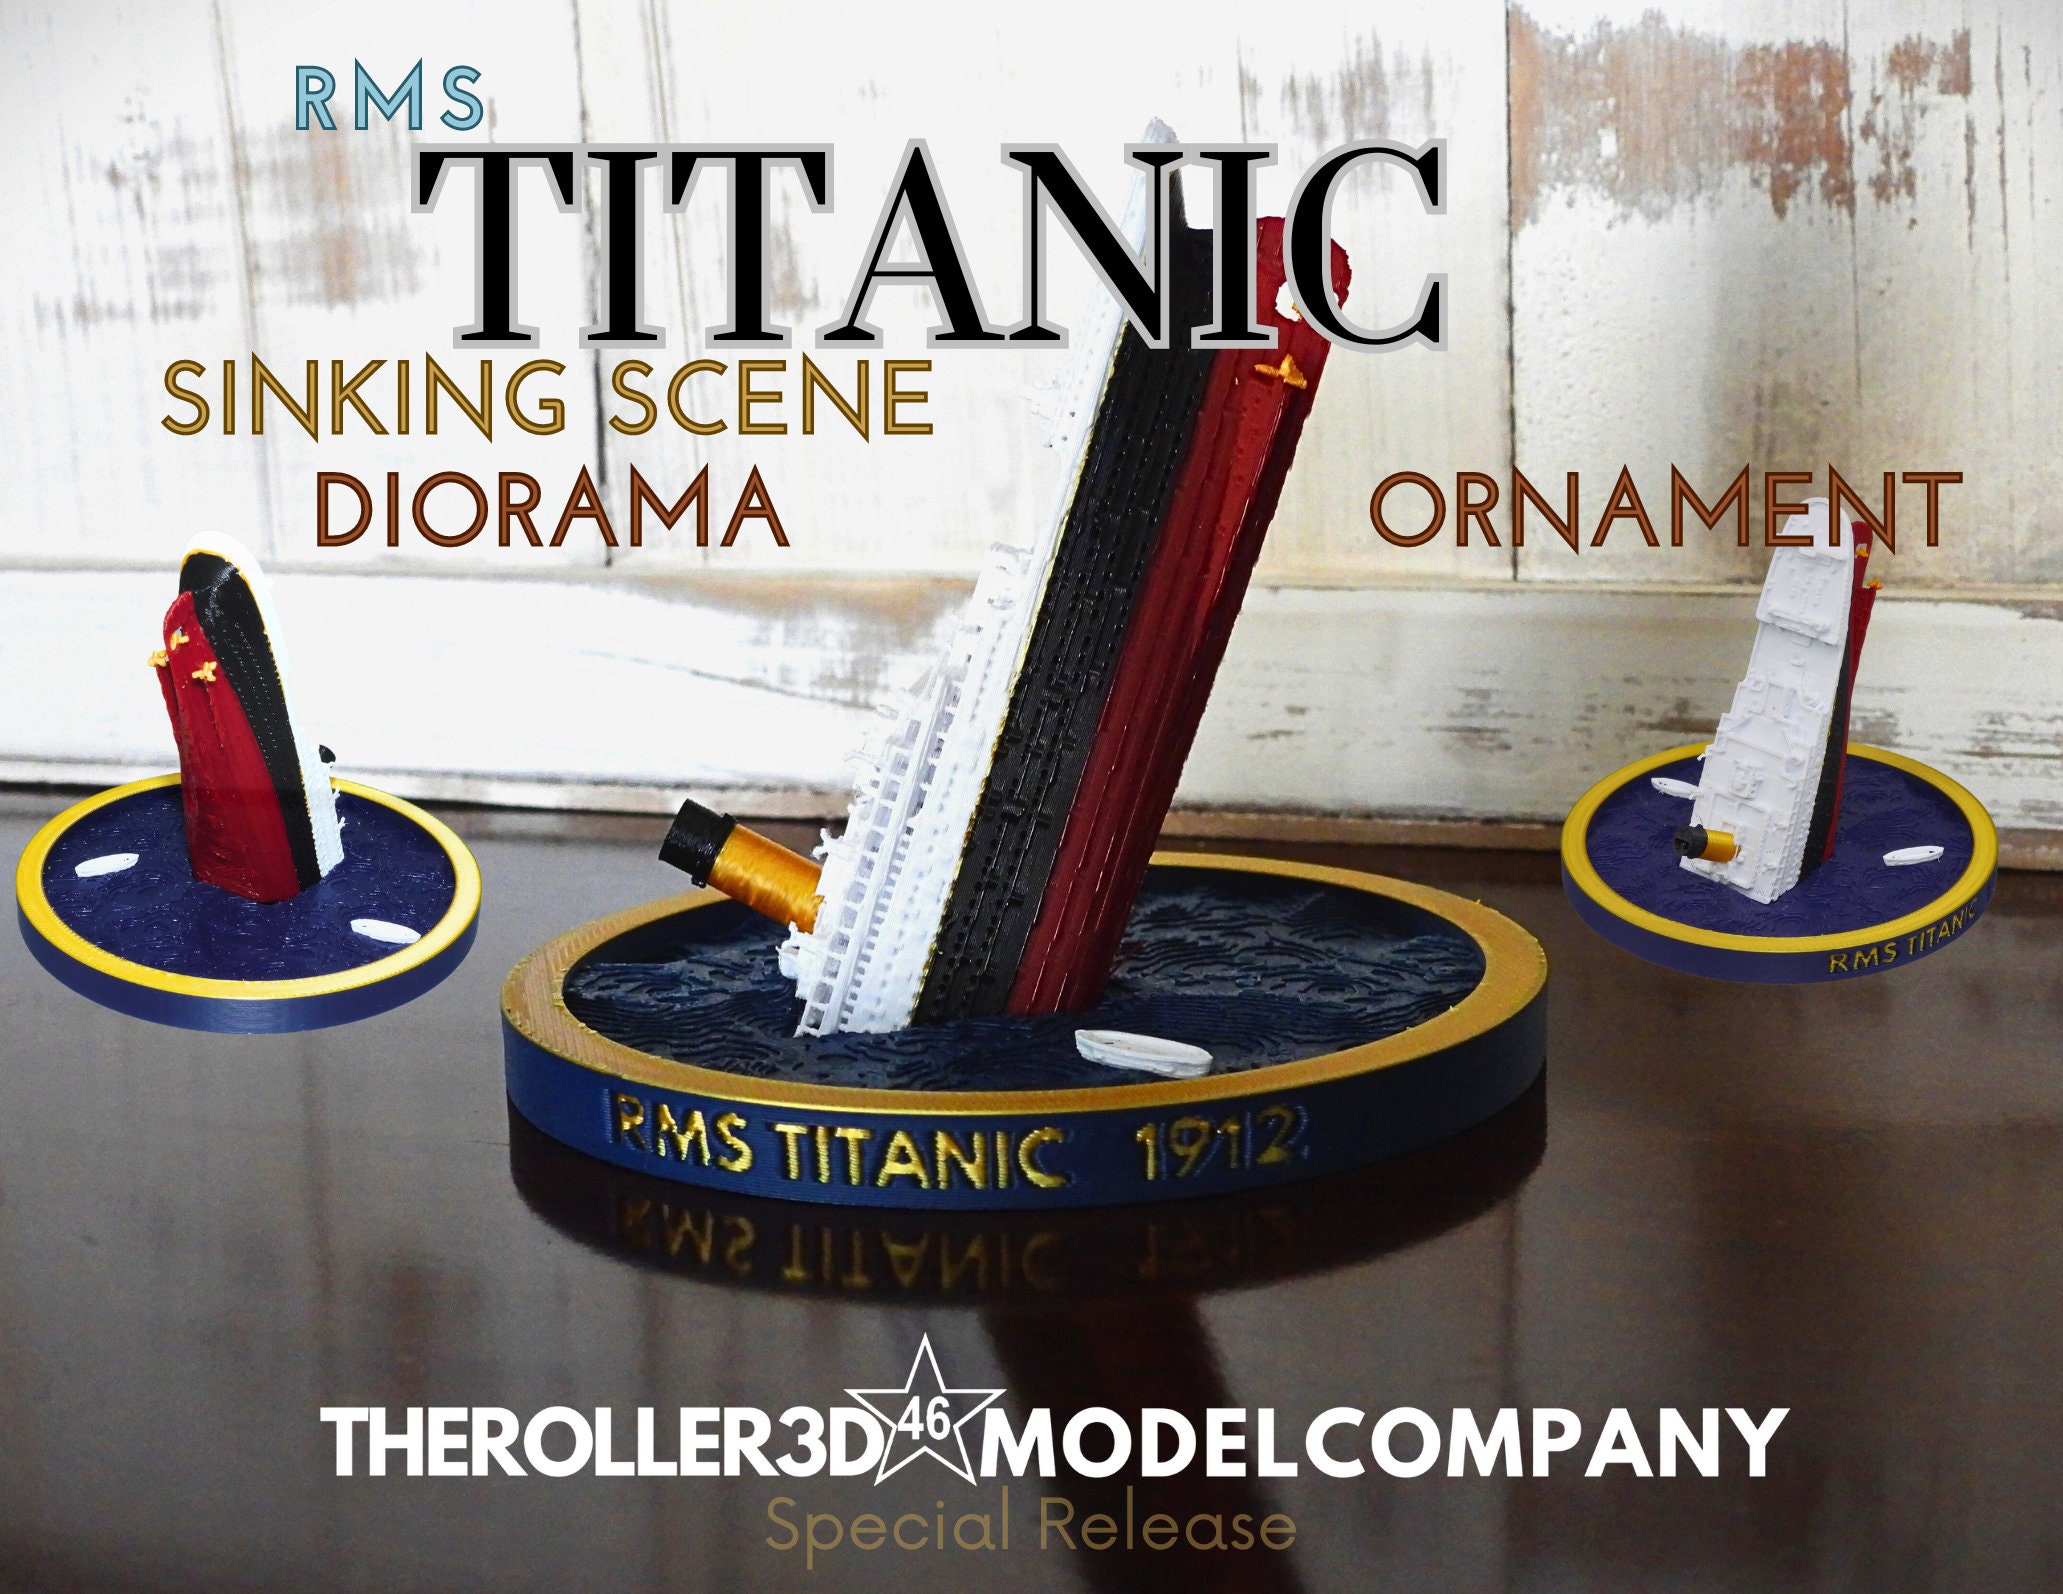 RMS Titanic Diorama Sinking Scene/ornament by Theroller3d Free 